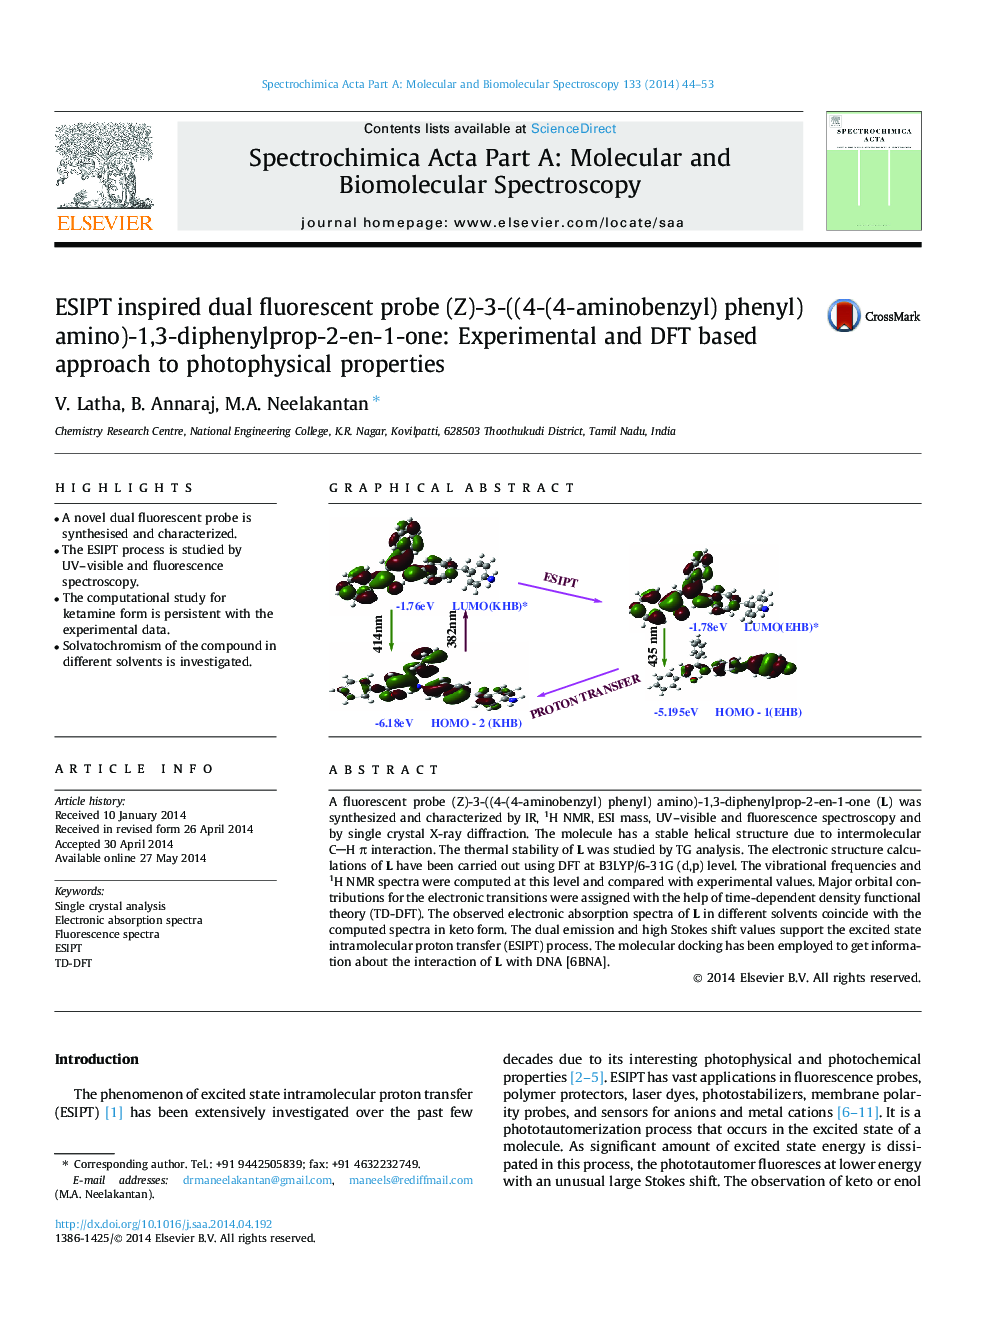 ESIPT inspired dual fluorescent probe (Z)-3-((4-(4-aminobenzyl) phenyl) amino)-1,3-diphenylprop-2-en-1-one: Experimental and DFT based approach to photophysical properties